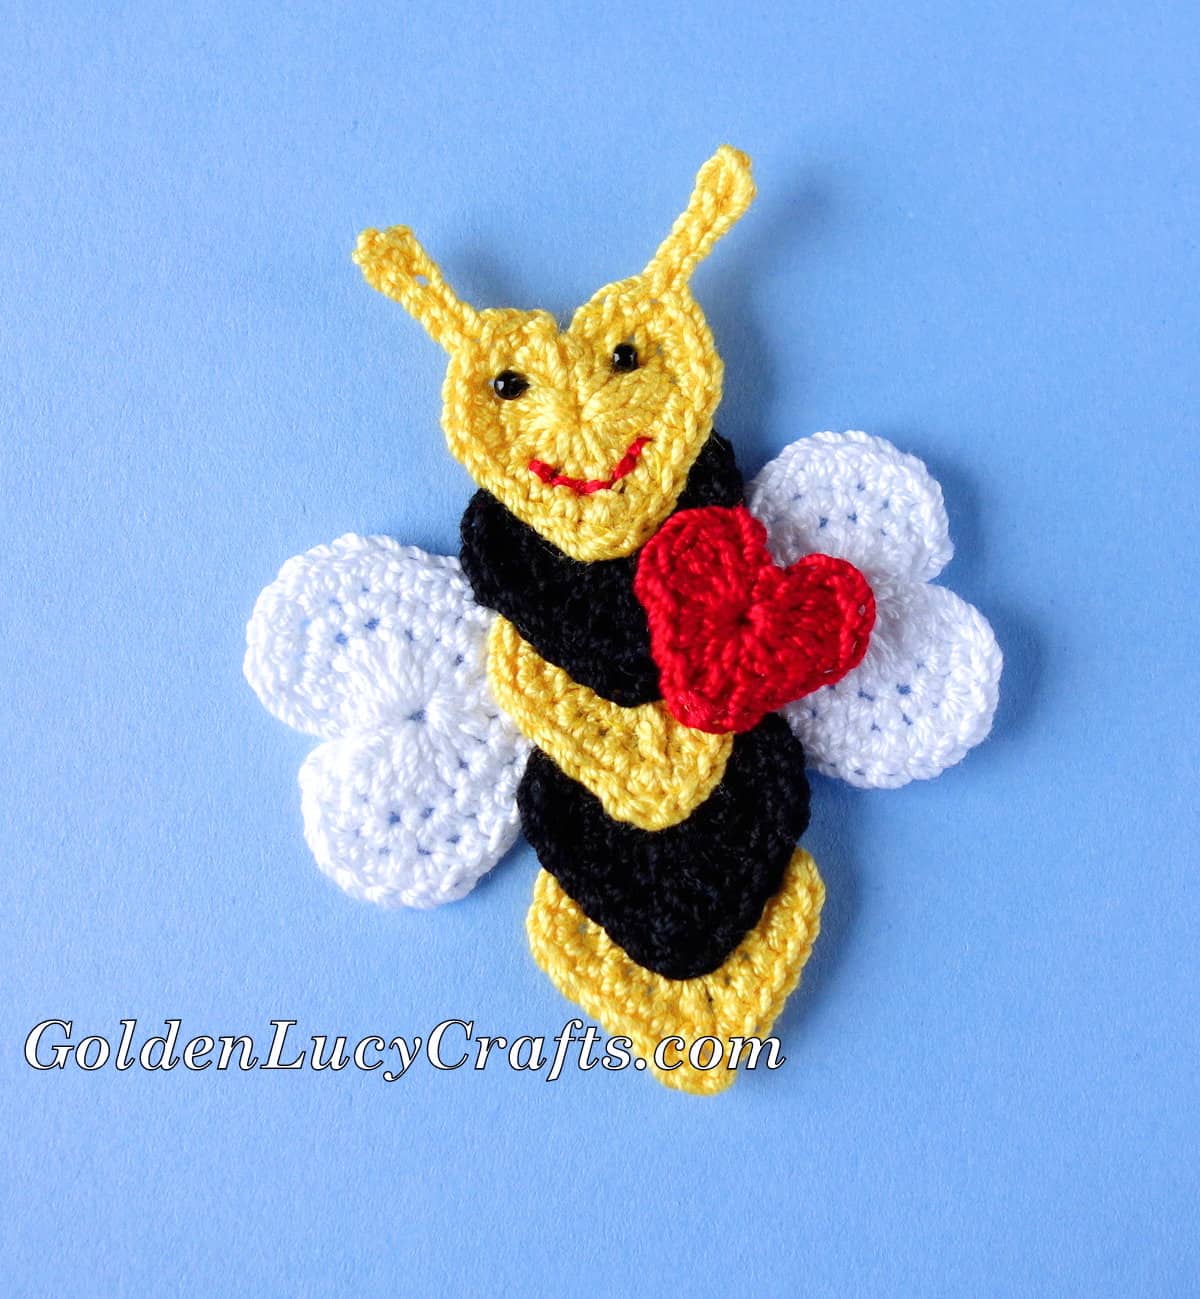 Crochet bee applique made from hearts